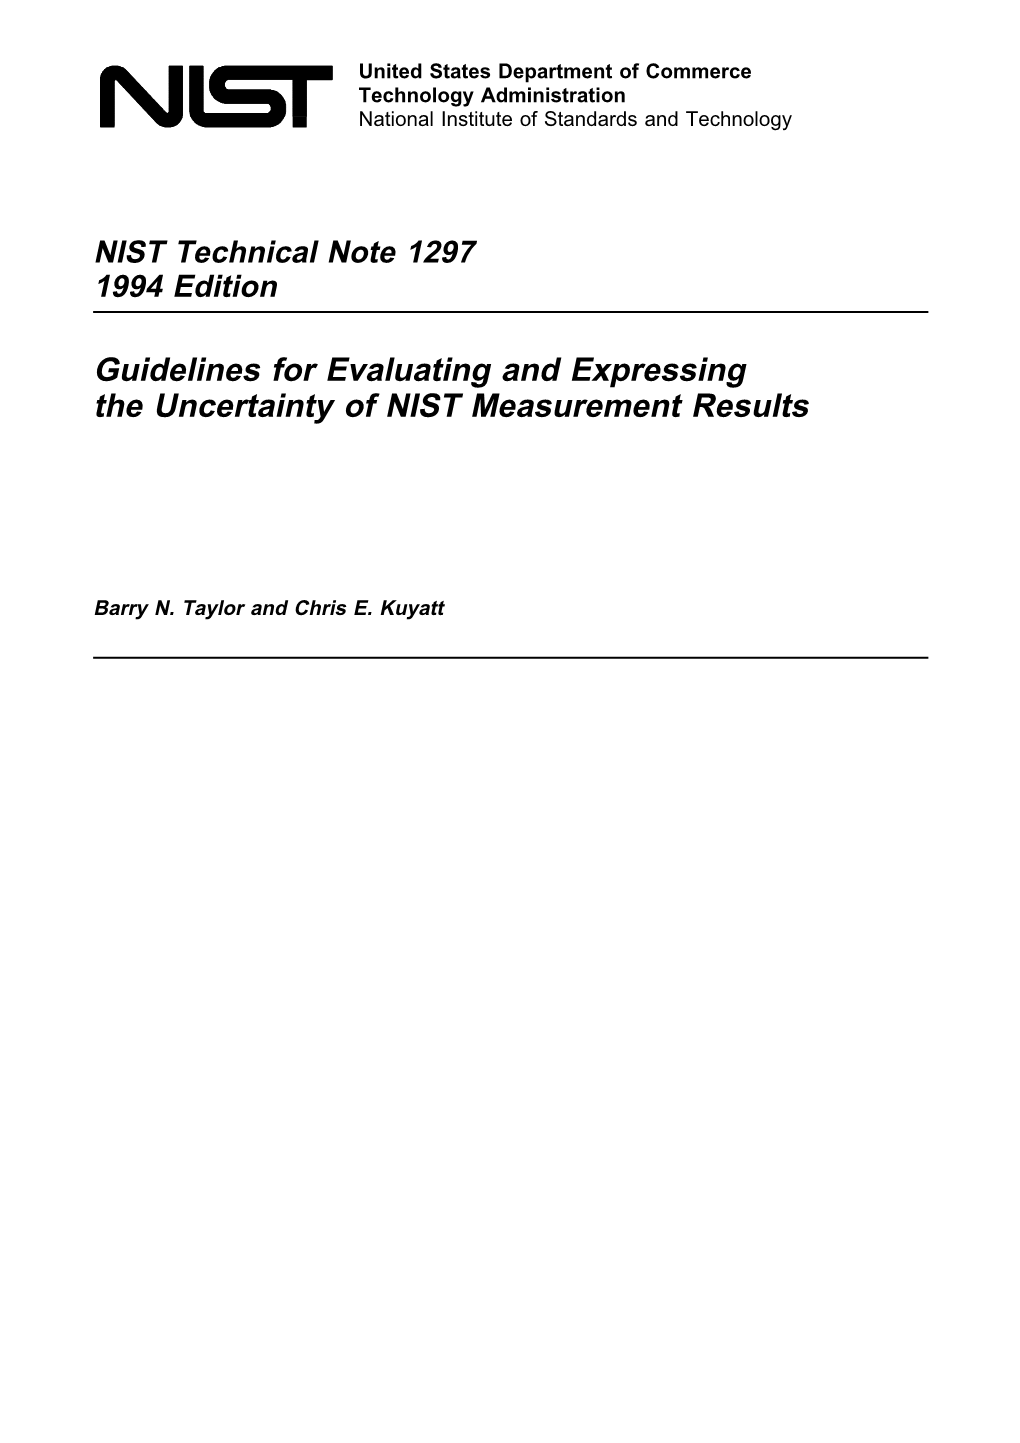 Guidelines for Evaluating and Expressing the Uncertainty of NIST Measurement Results